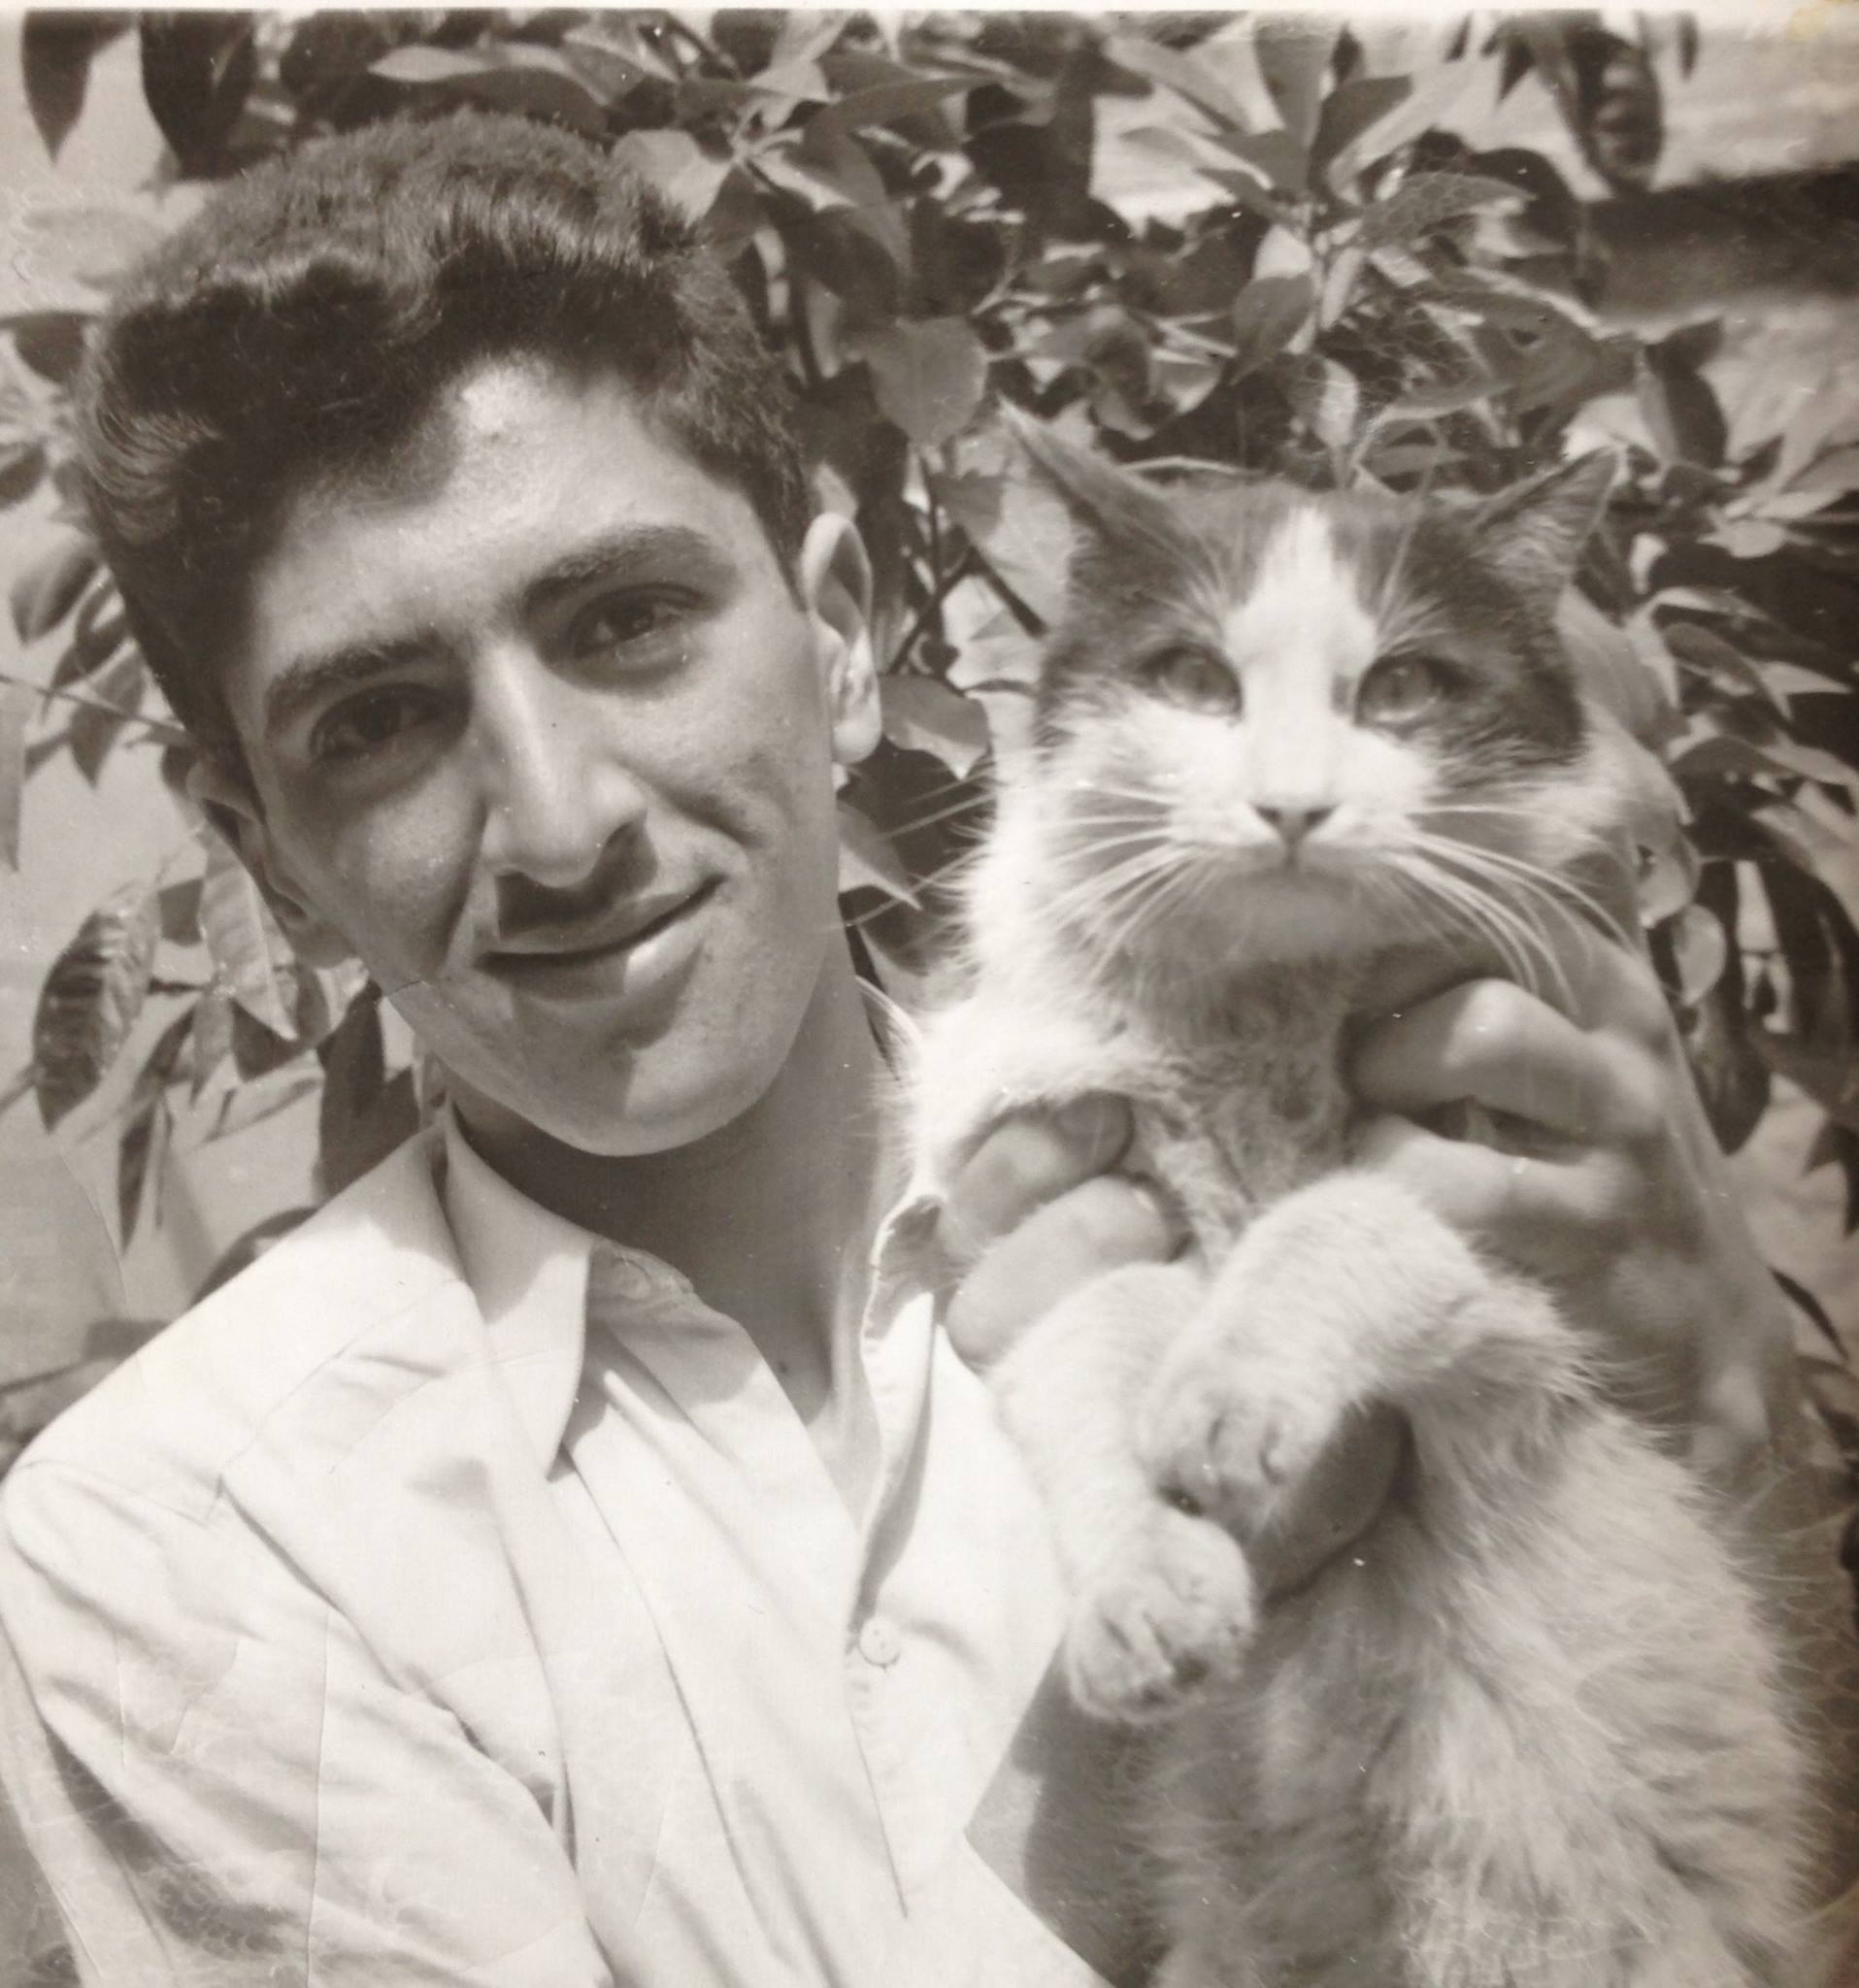 My uncle Farrokh, in his youth, shown holding a big Persian cat